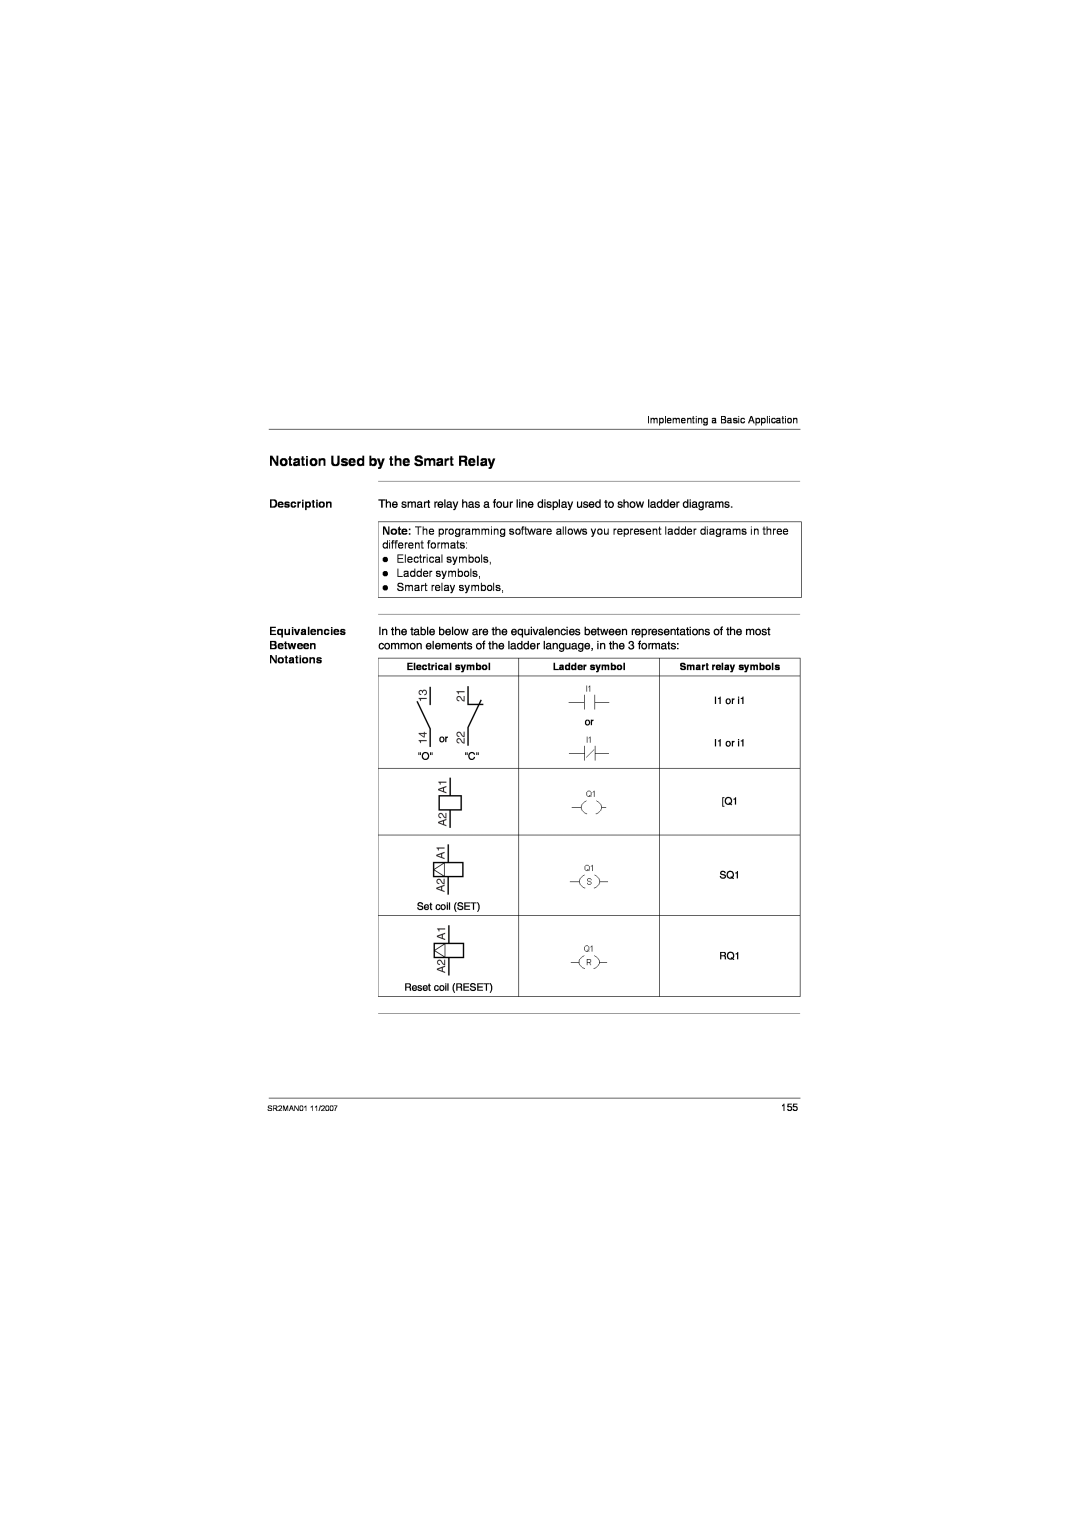 Schneider Electric SR2MAN01 Notation Used by the Smart Relay, Description, Equivalencies Between Notations, Ladder symbol 